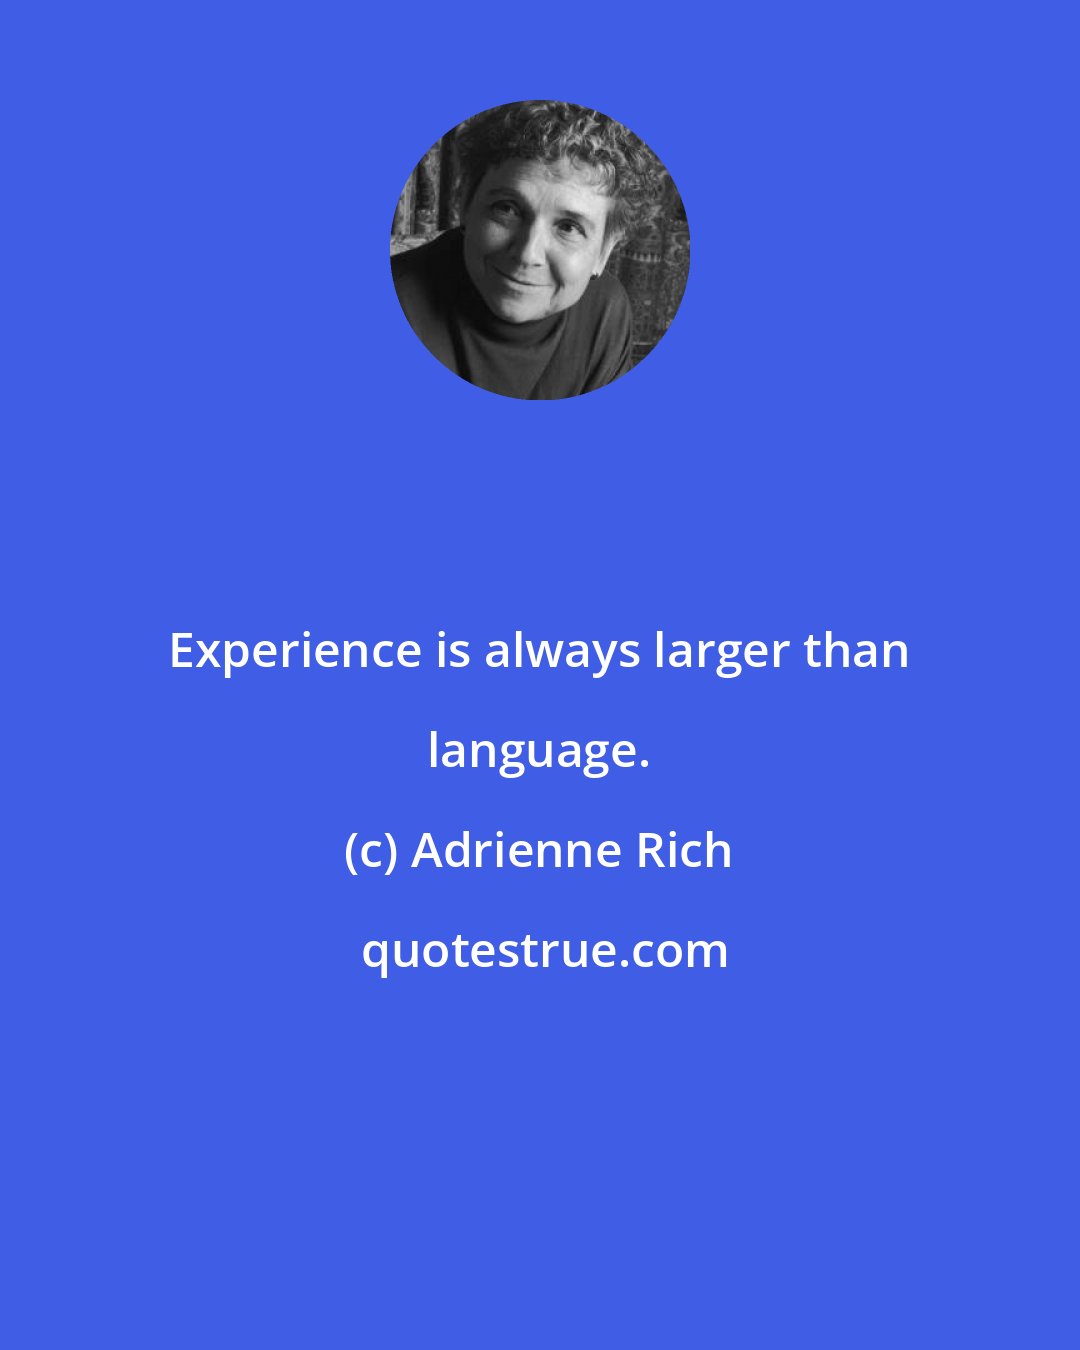 Adrienne Rich: Experience is always larger than language.